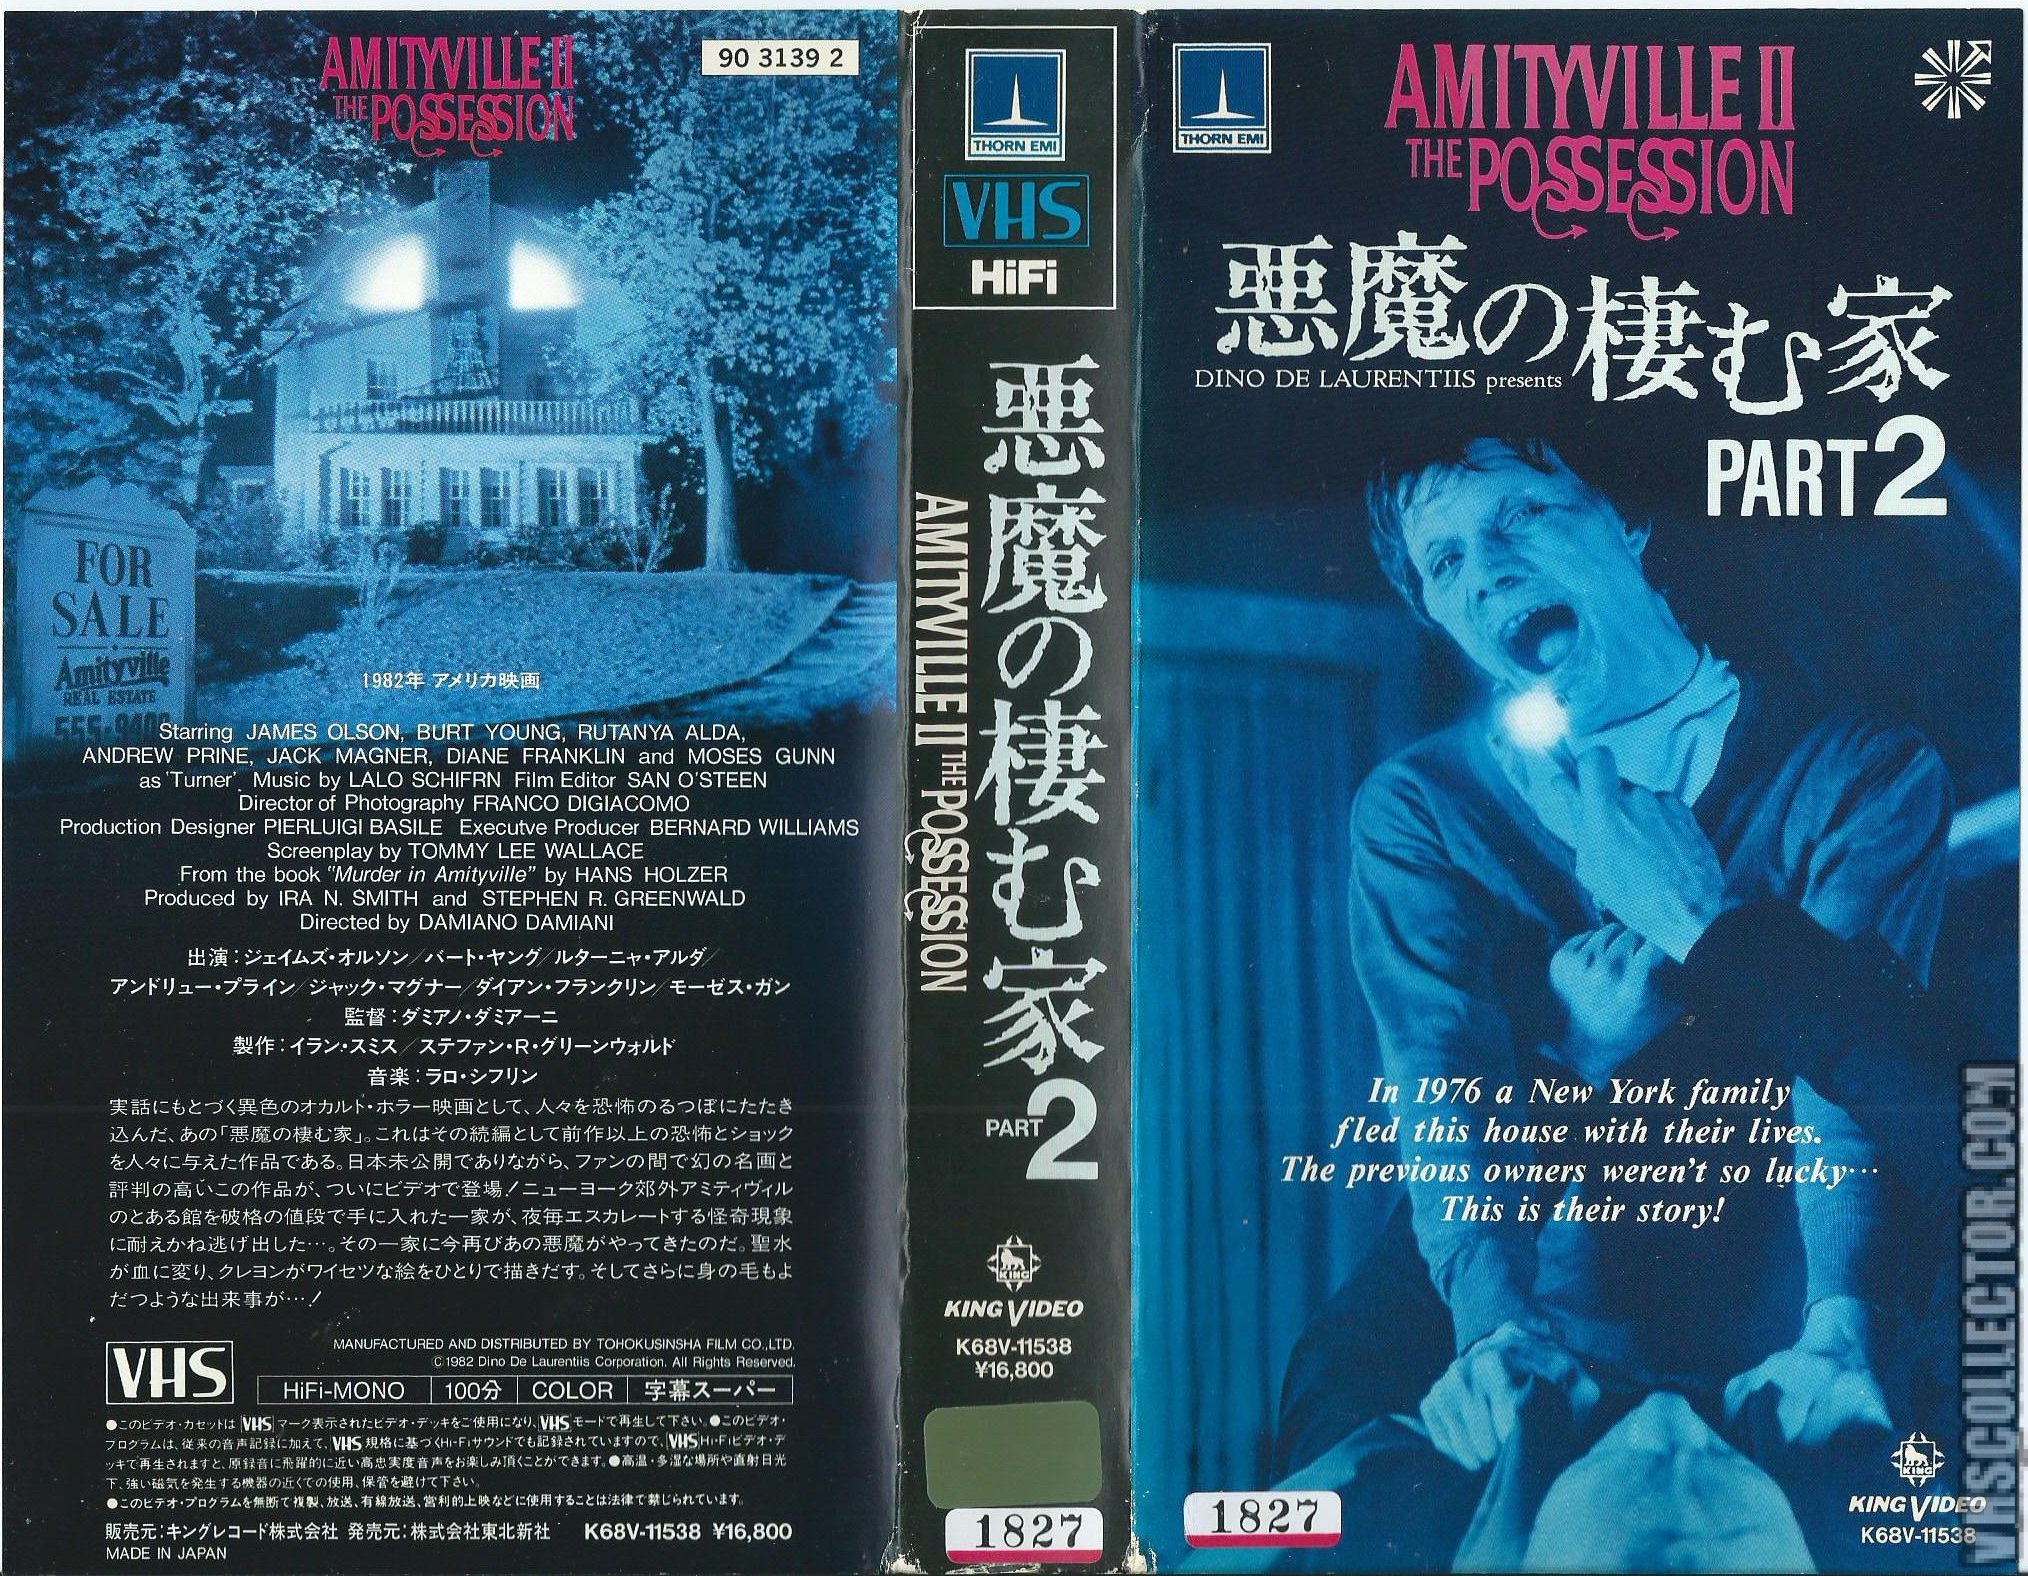 Amityville II: The Possession #7